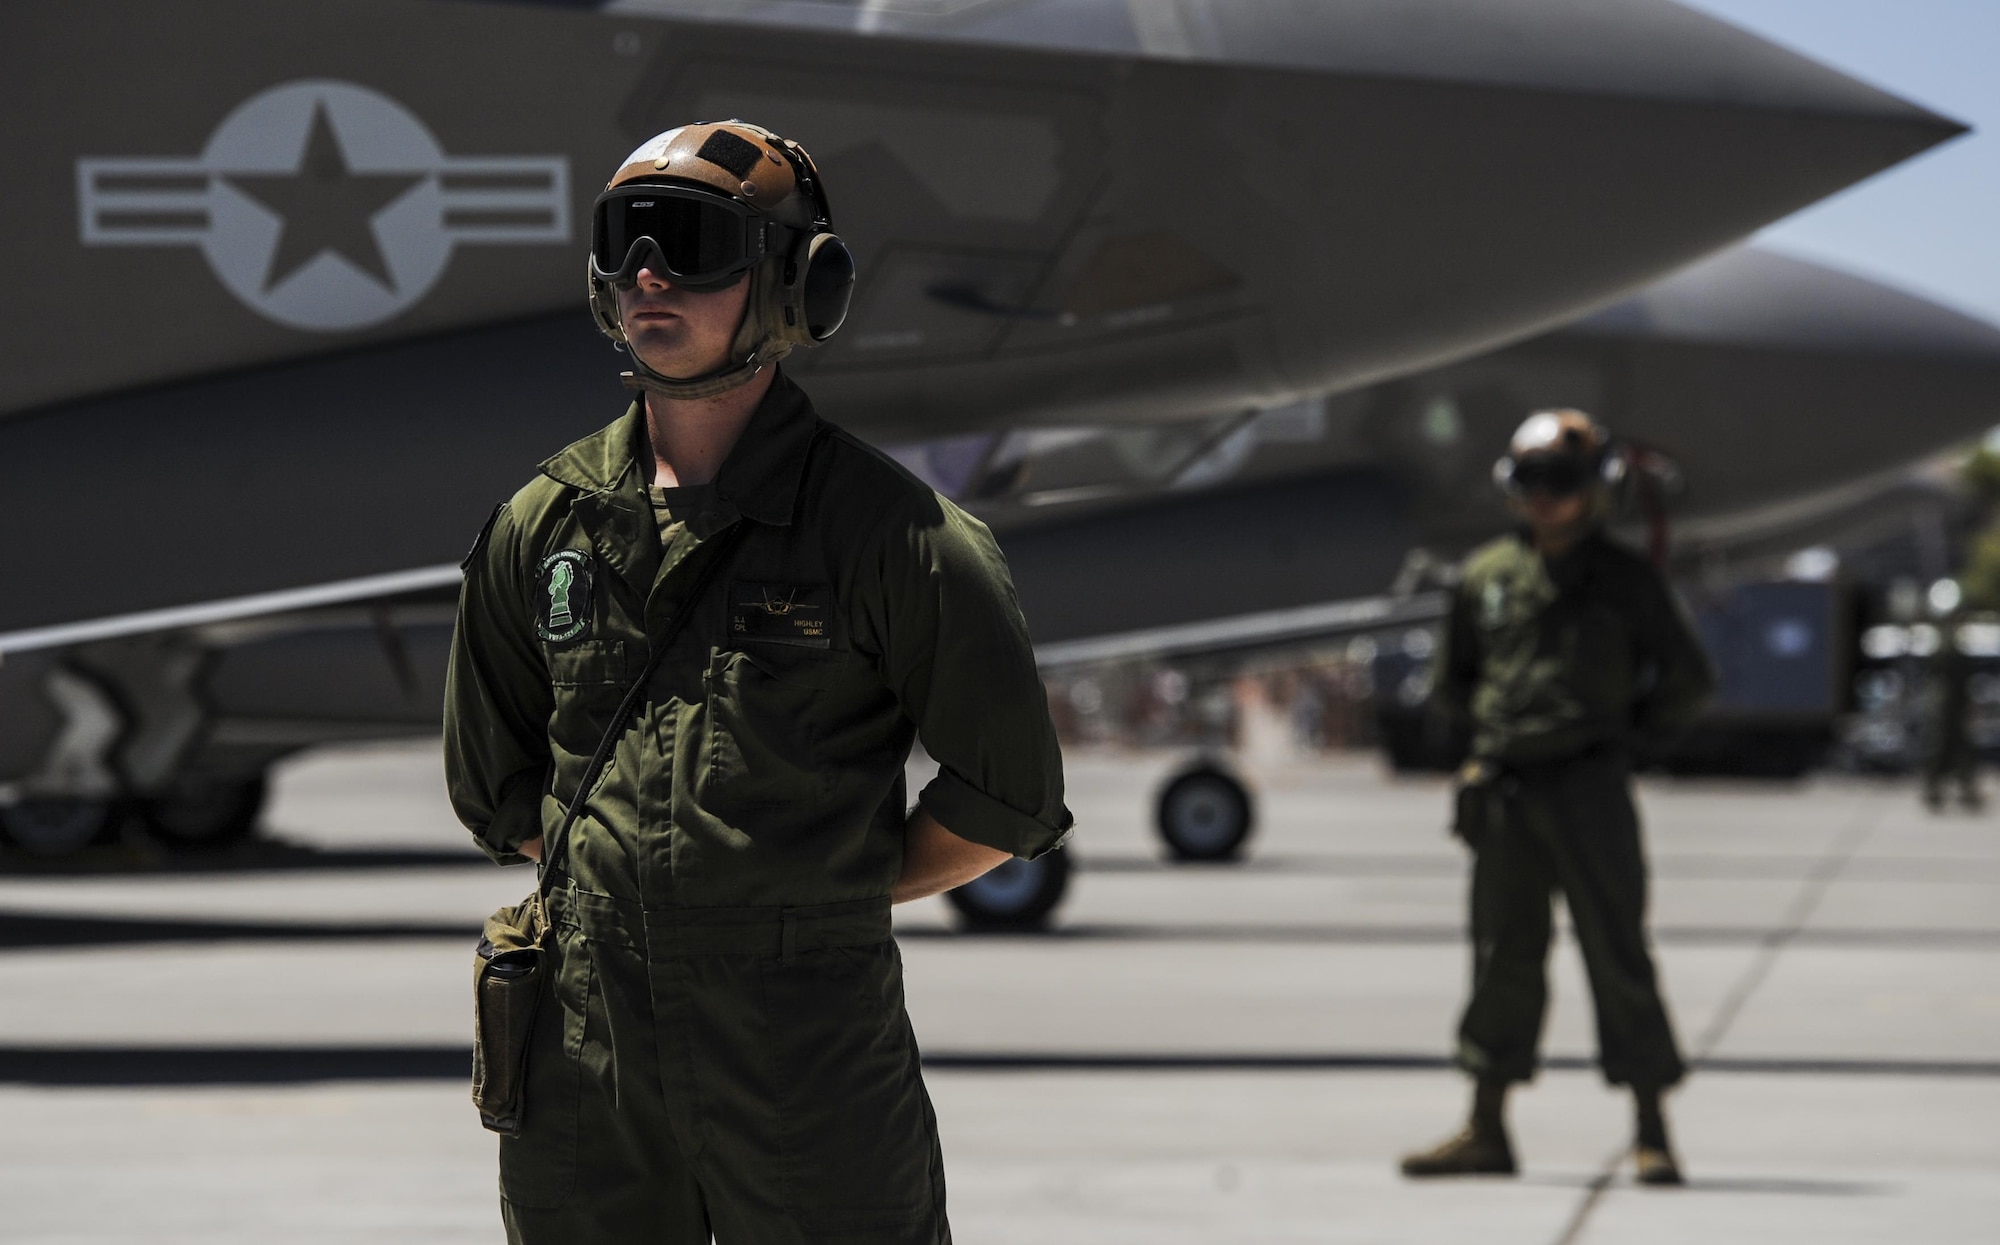 Corporal Highley, assigned to the 3rd Marine Aircraft Wing, Marine Corps Air Station Yuma, Az., prepares to marshal an F-35B during Red Flag 16-3 at Nellis Air Force Base, Nev., July 12, 2016. Red Flag is an exercise hosted at Nellis AFB that provides air crews an opportunity to experience realistic, stressful combat situations in a controlled environment to increase mission capability. (U.S. Air Force photo by Airman 1st Class Kevin Tanenbaum)